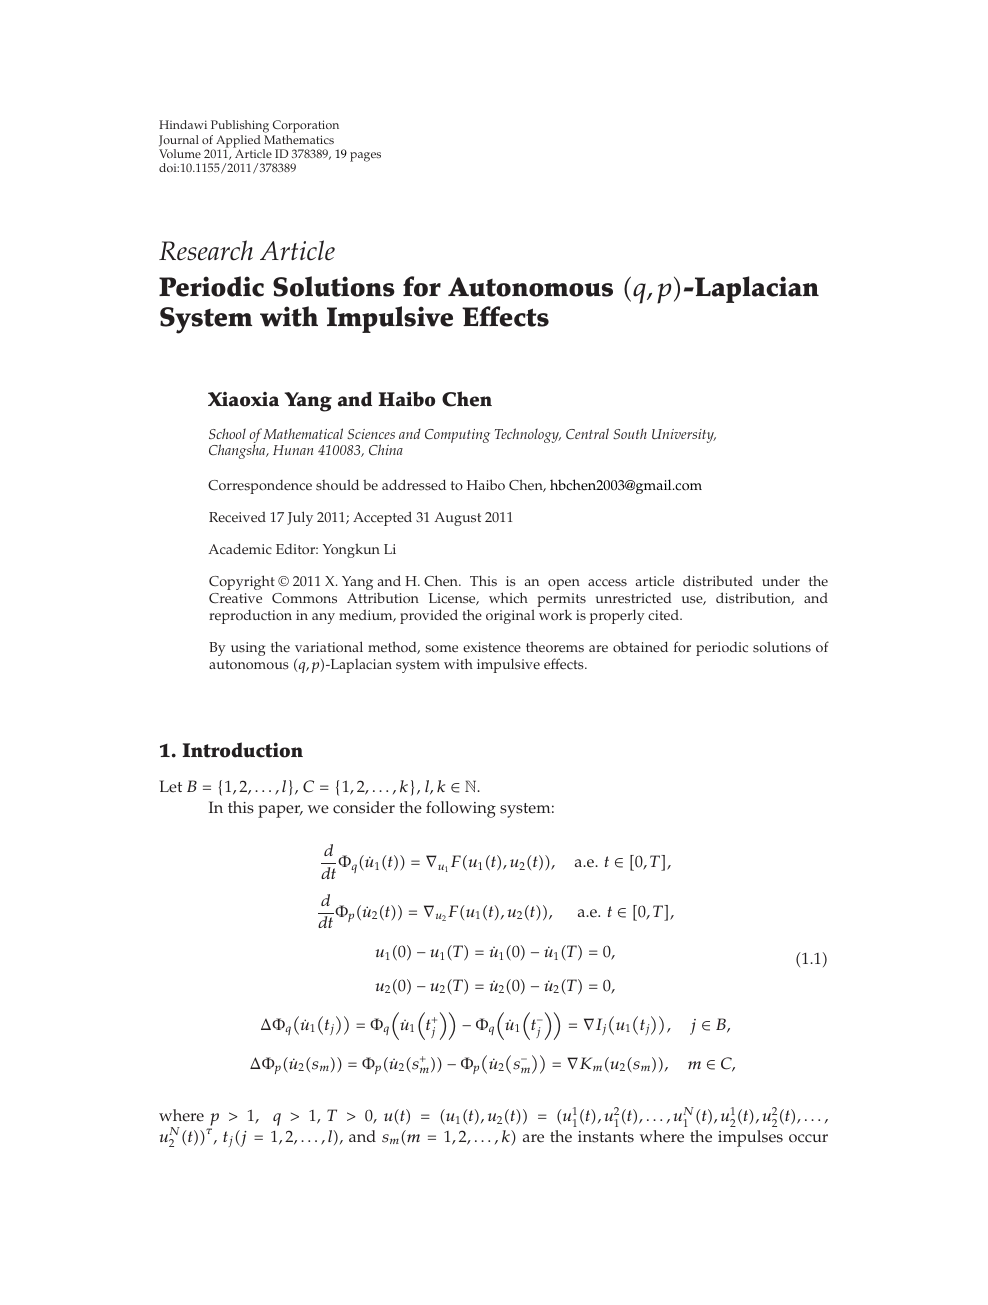 Periodic Solutions For Autonomous 𝑞 𝑝 Laplacian System With Impulsive Effects Topic Of Research Paper In Mathematics Download Scholarly Article Pdf And Read For Free On Cyberleninka Open Science Hub